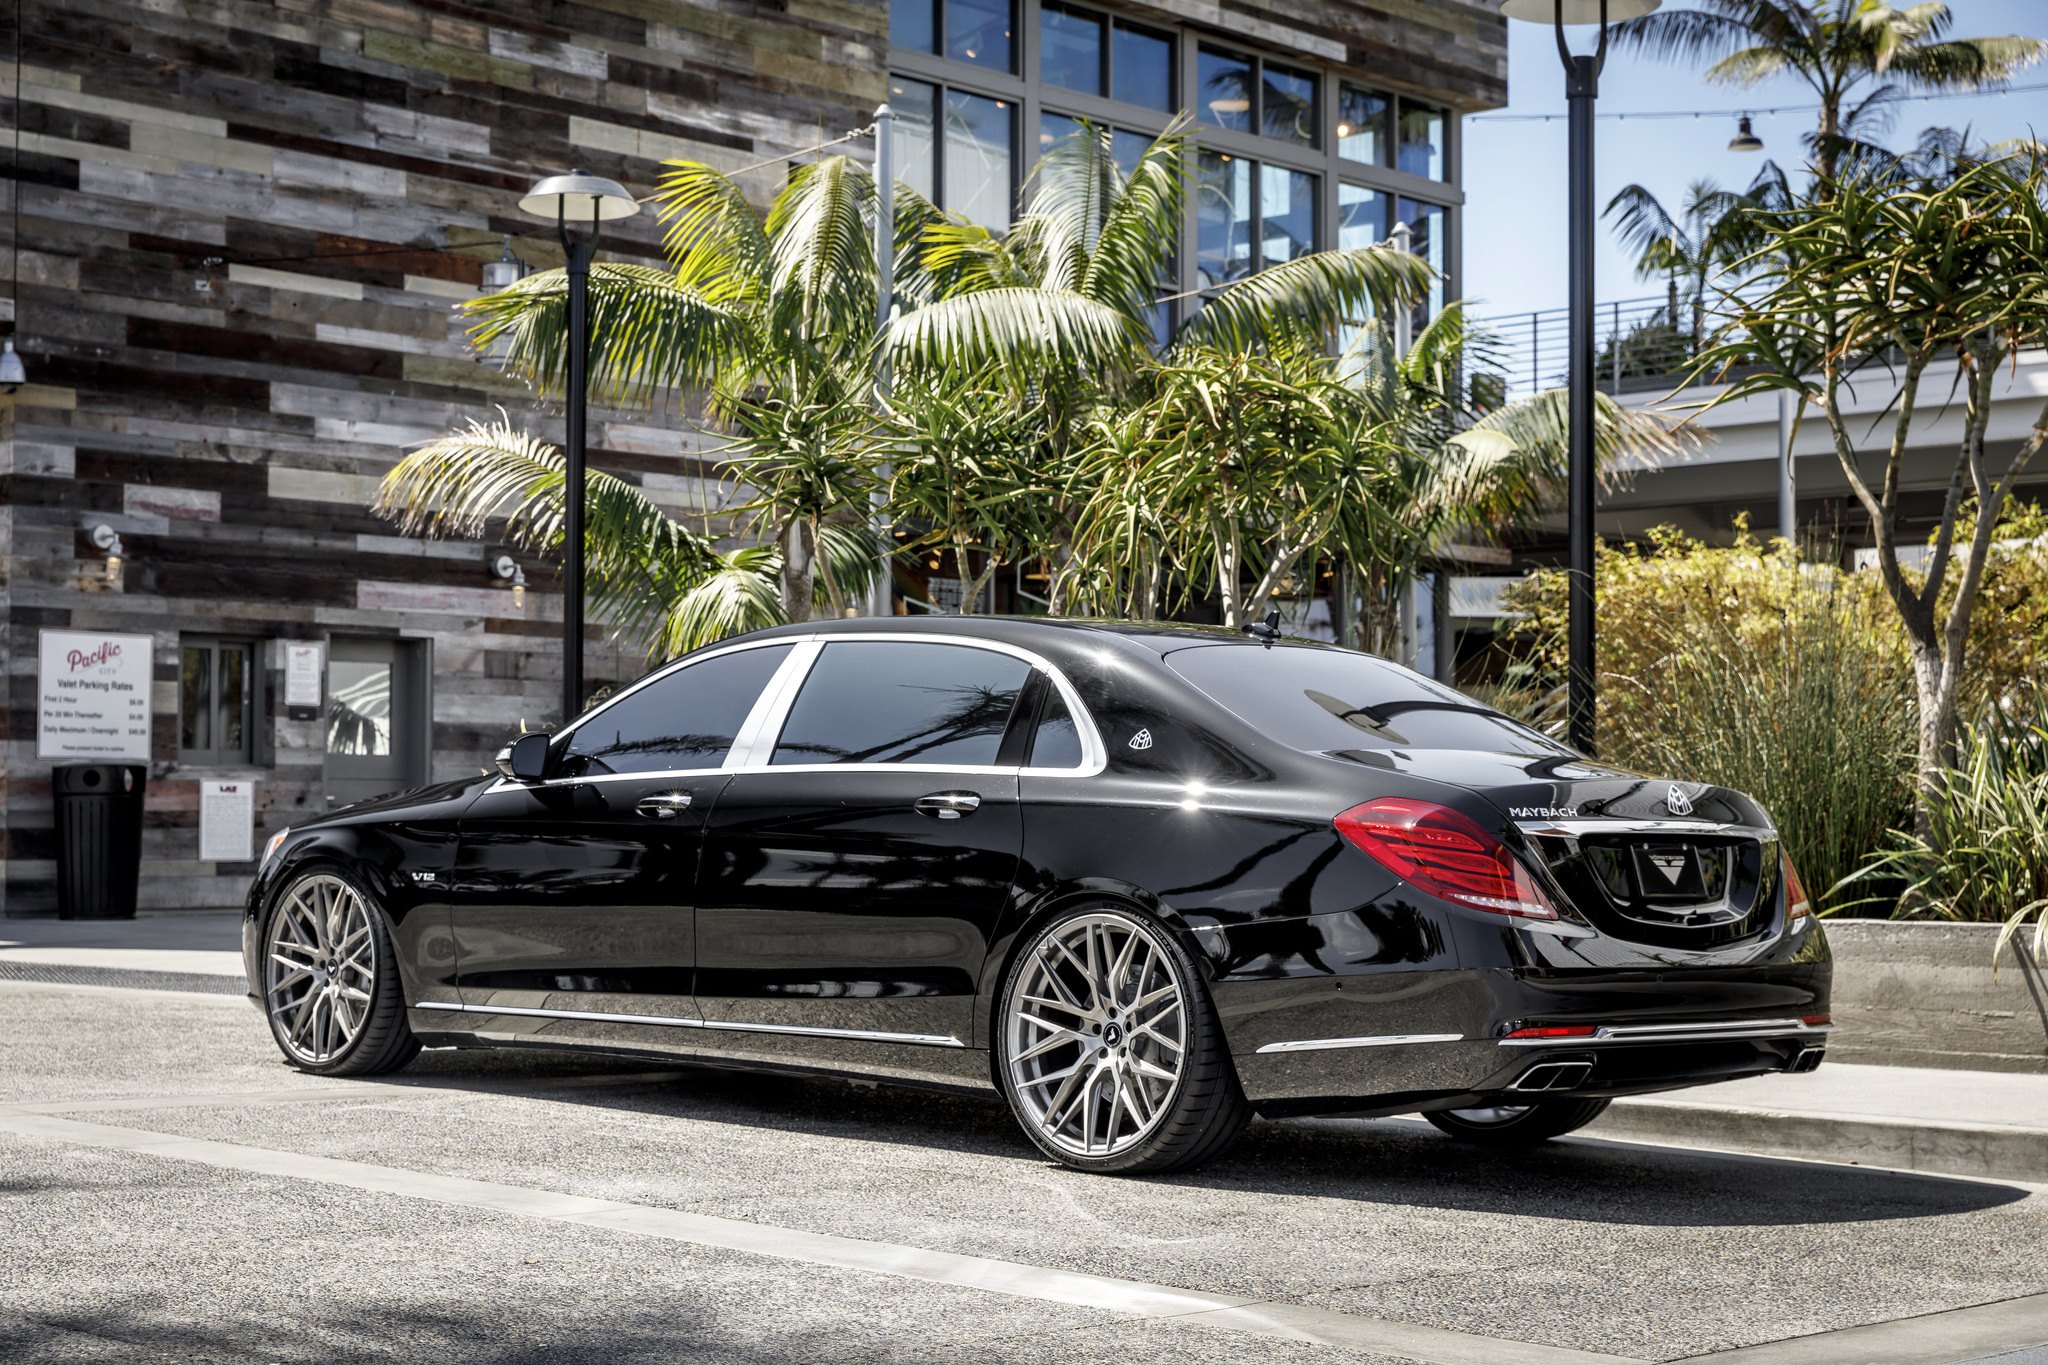 Aftermarket Red LED Taillights on Black Mercedes S Class - Photo by Vorsteiner